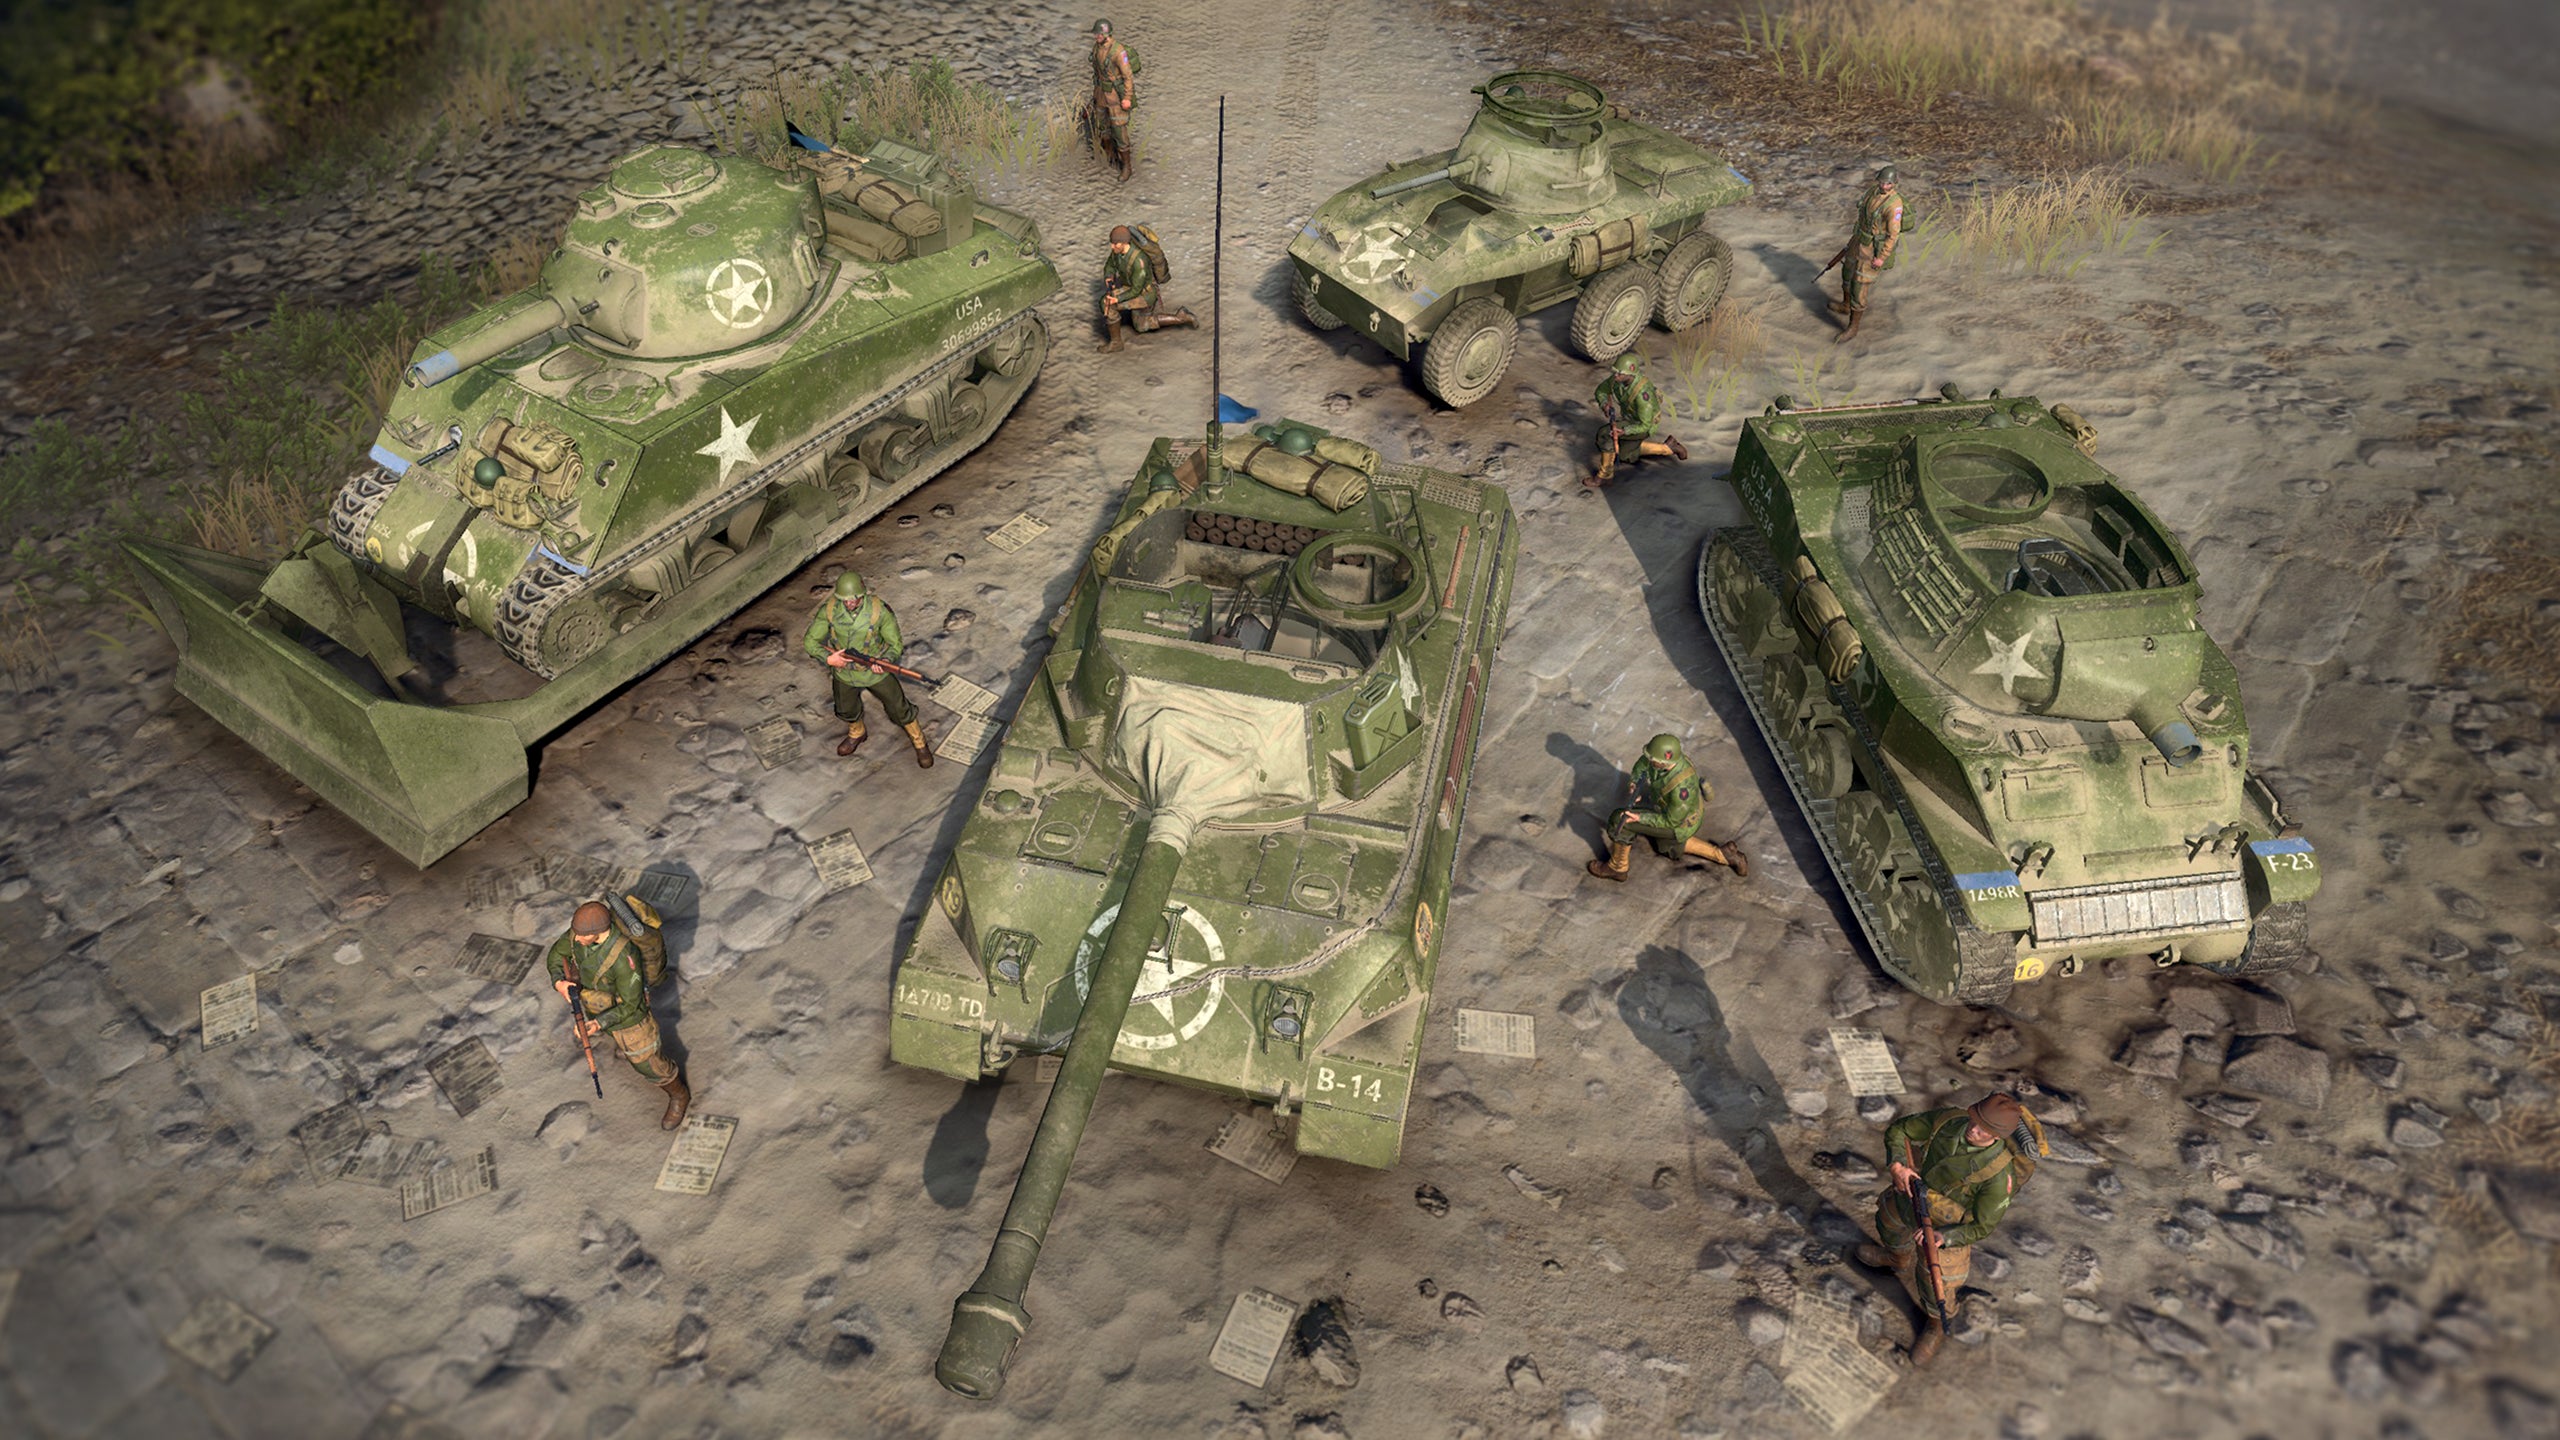 Company of Heroes 3 preview - view of four Italian vehicles and some infantry